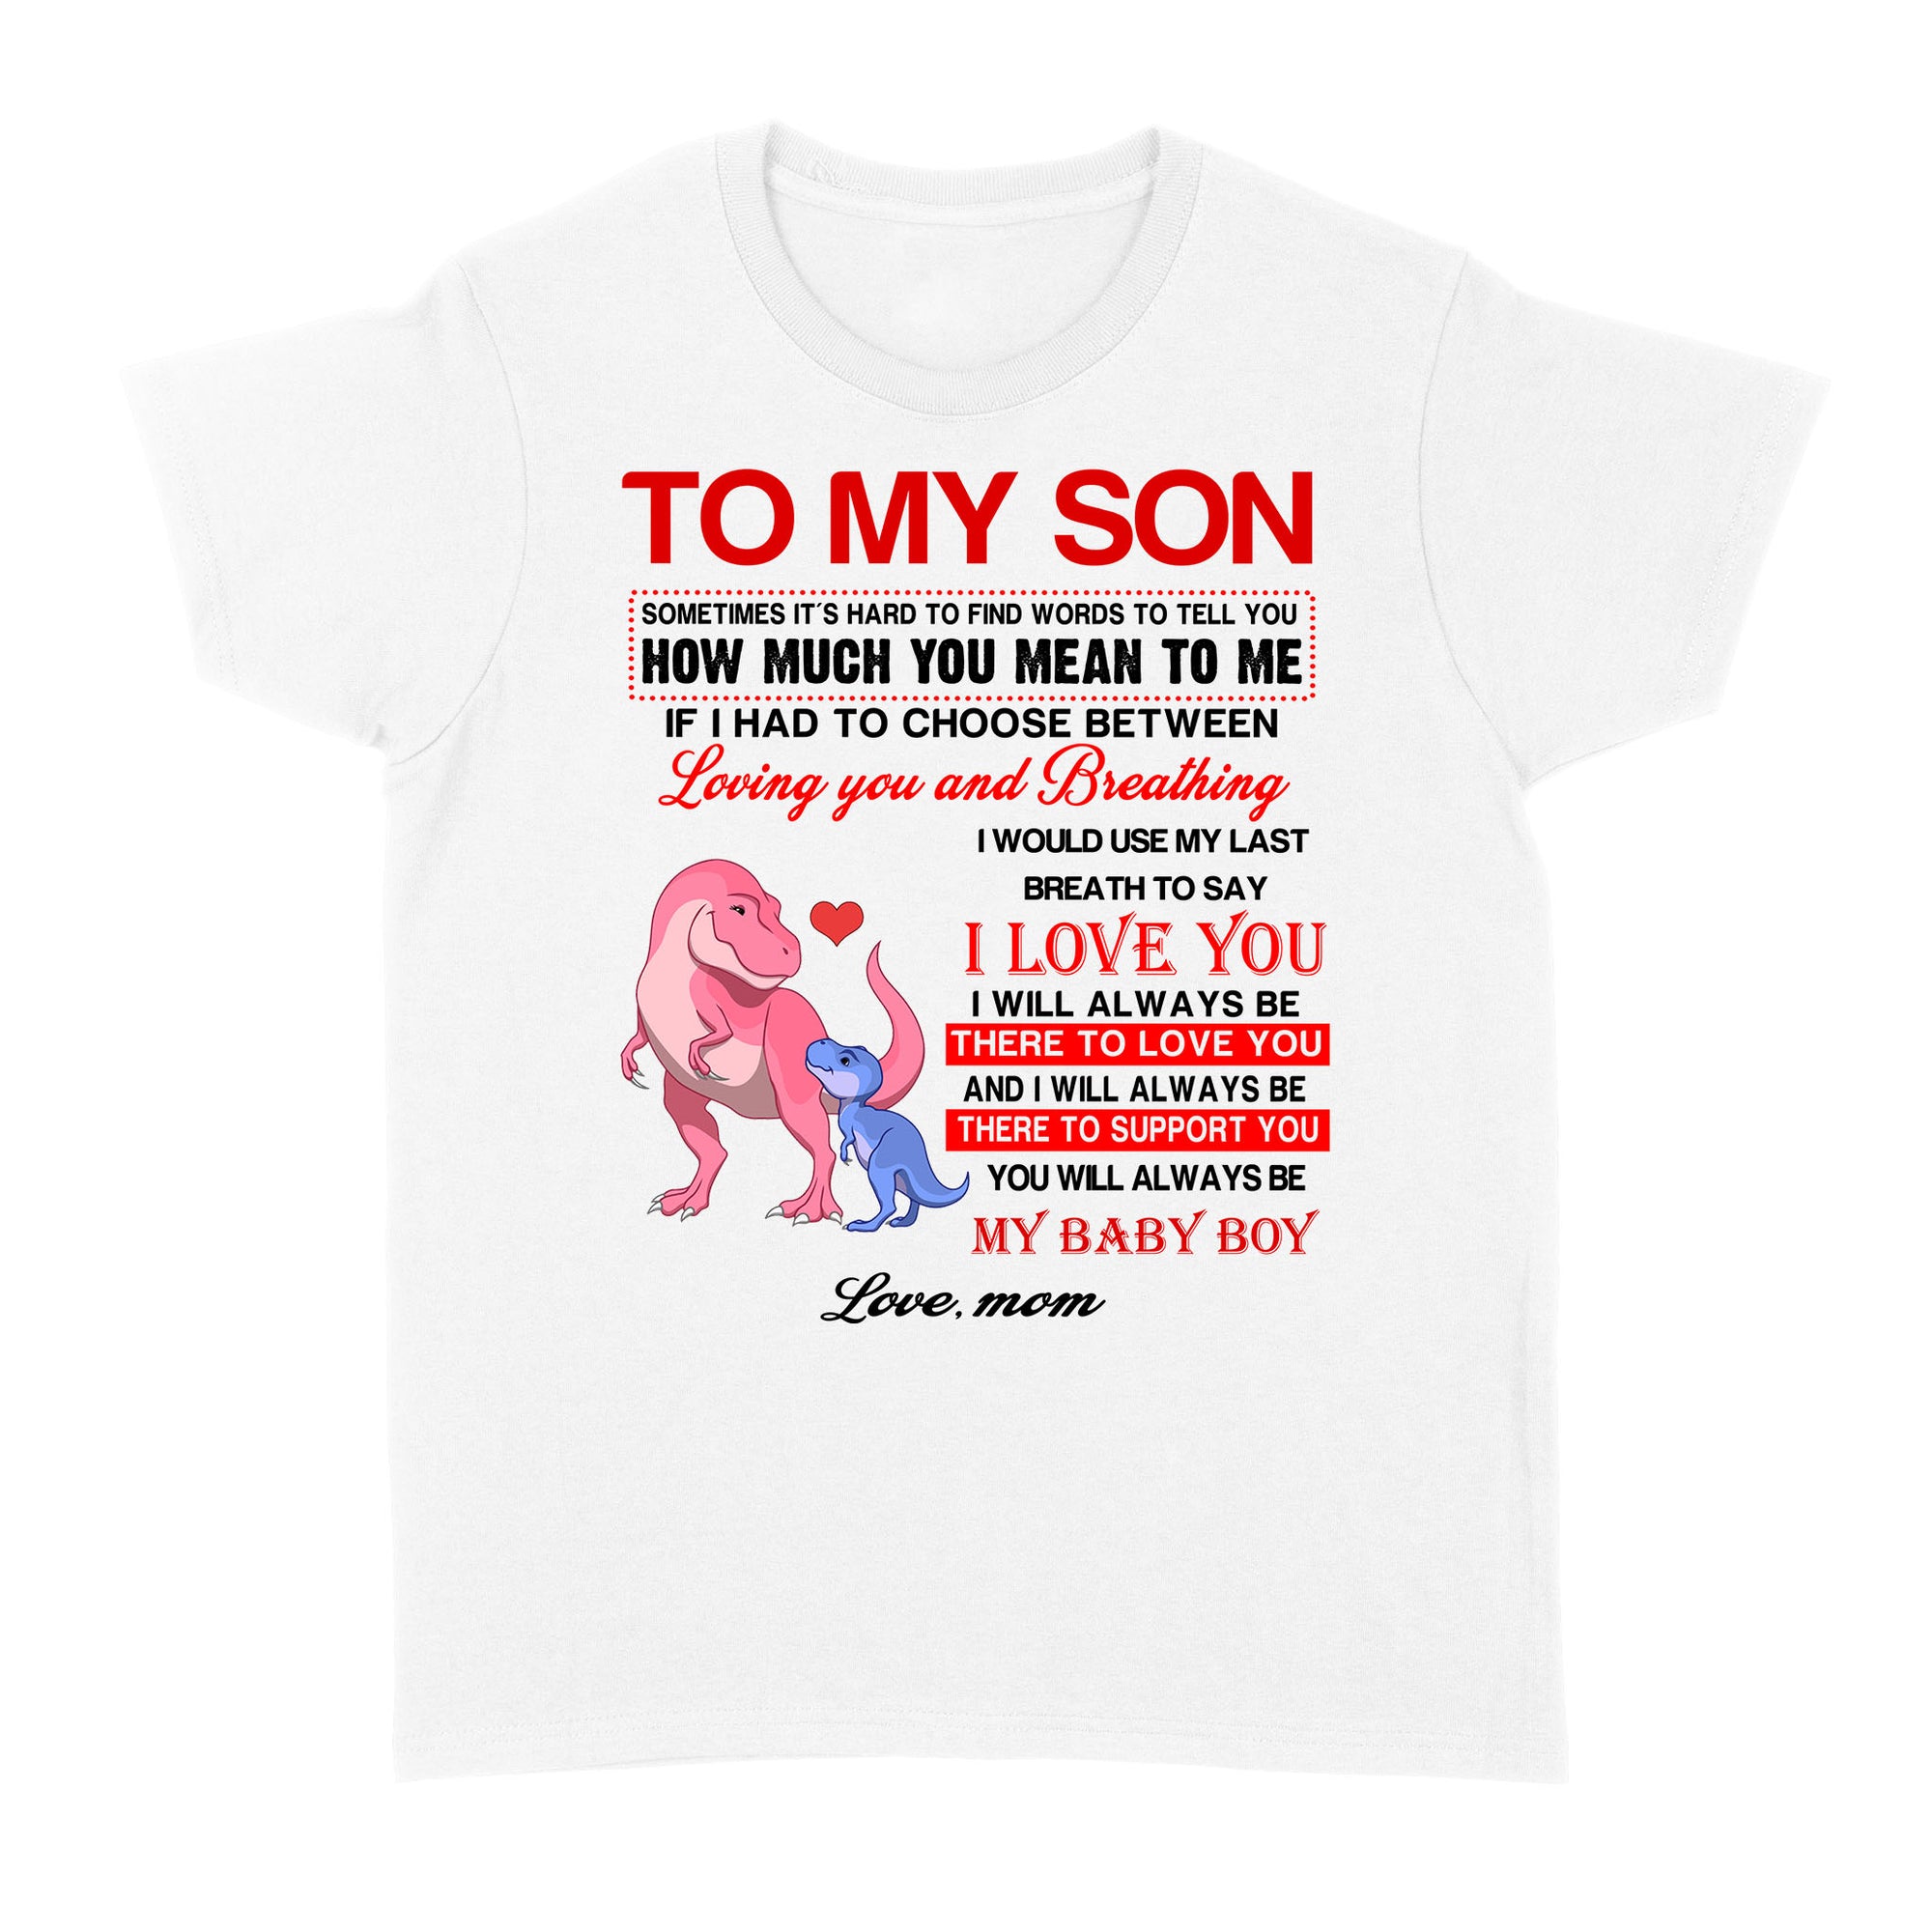 To My Son Sometimes It’s Hard To Find Words To Tell You How Much You Mean To Me, Mamasaurus - Standard Women's T-shirt